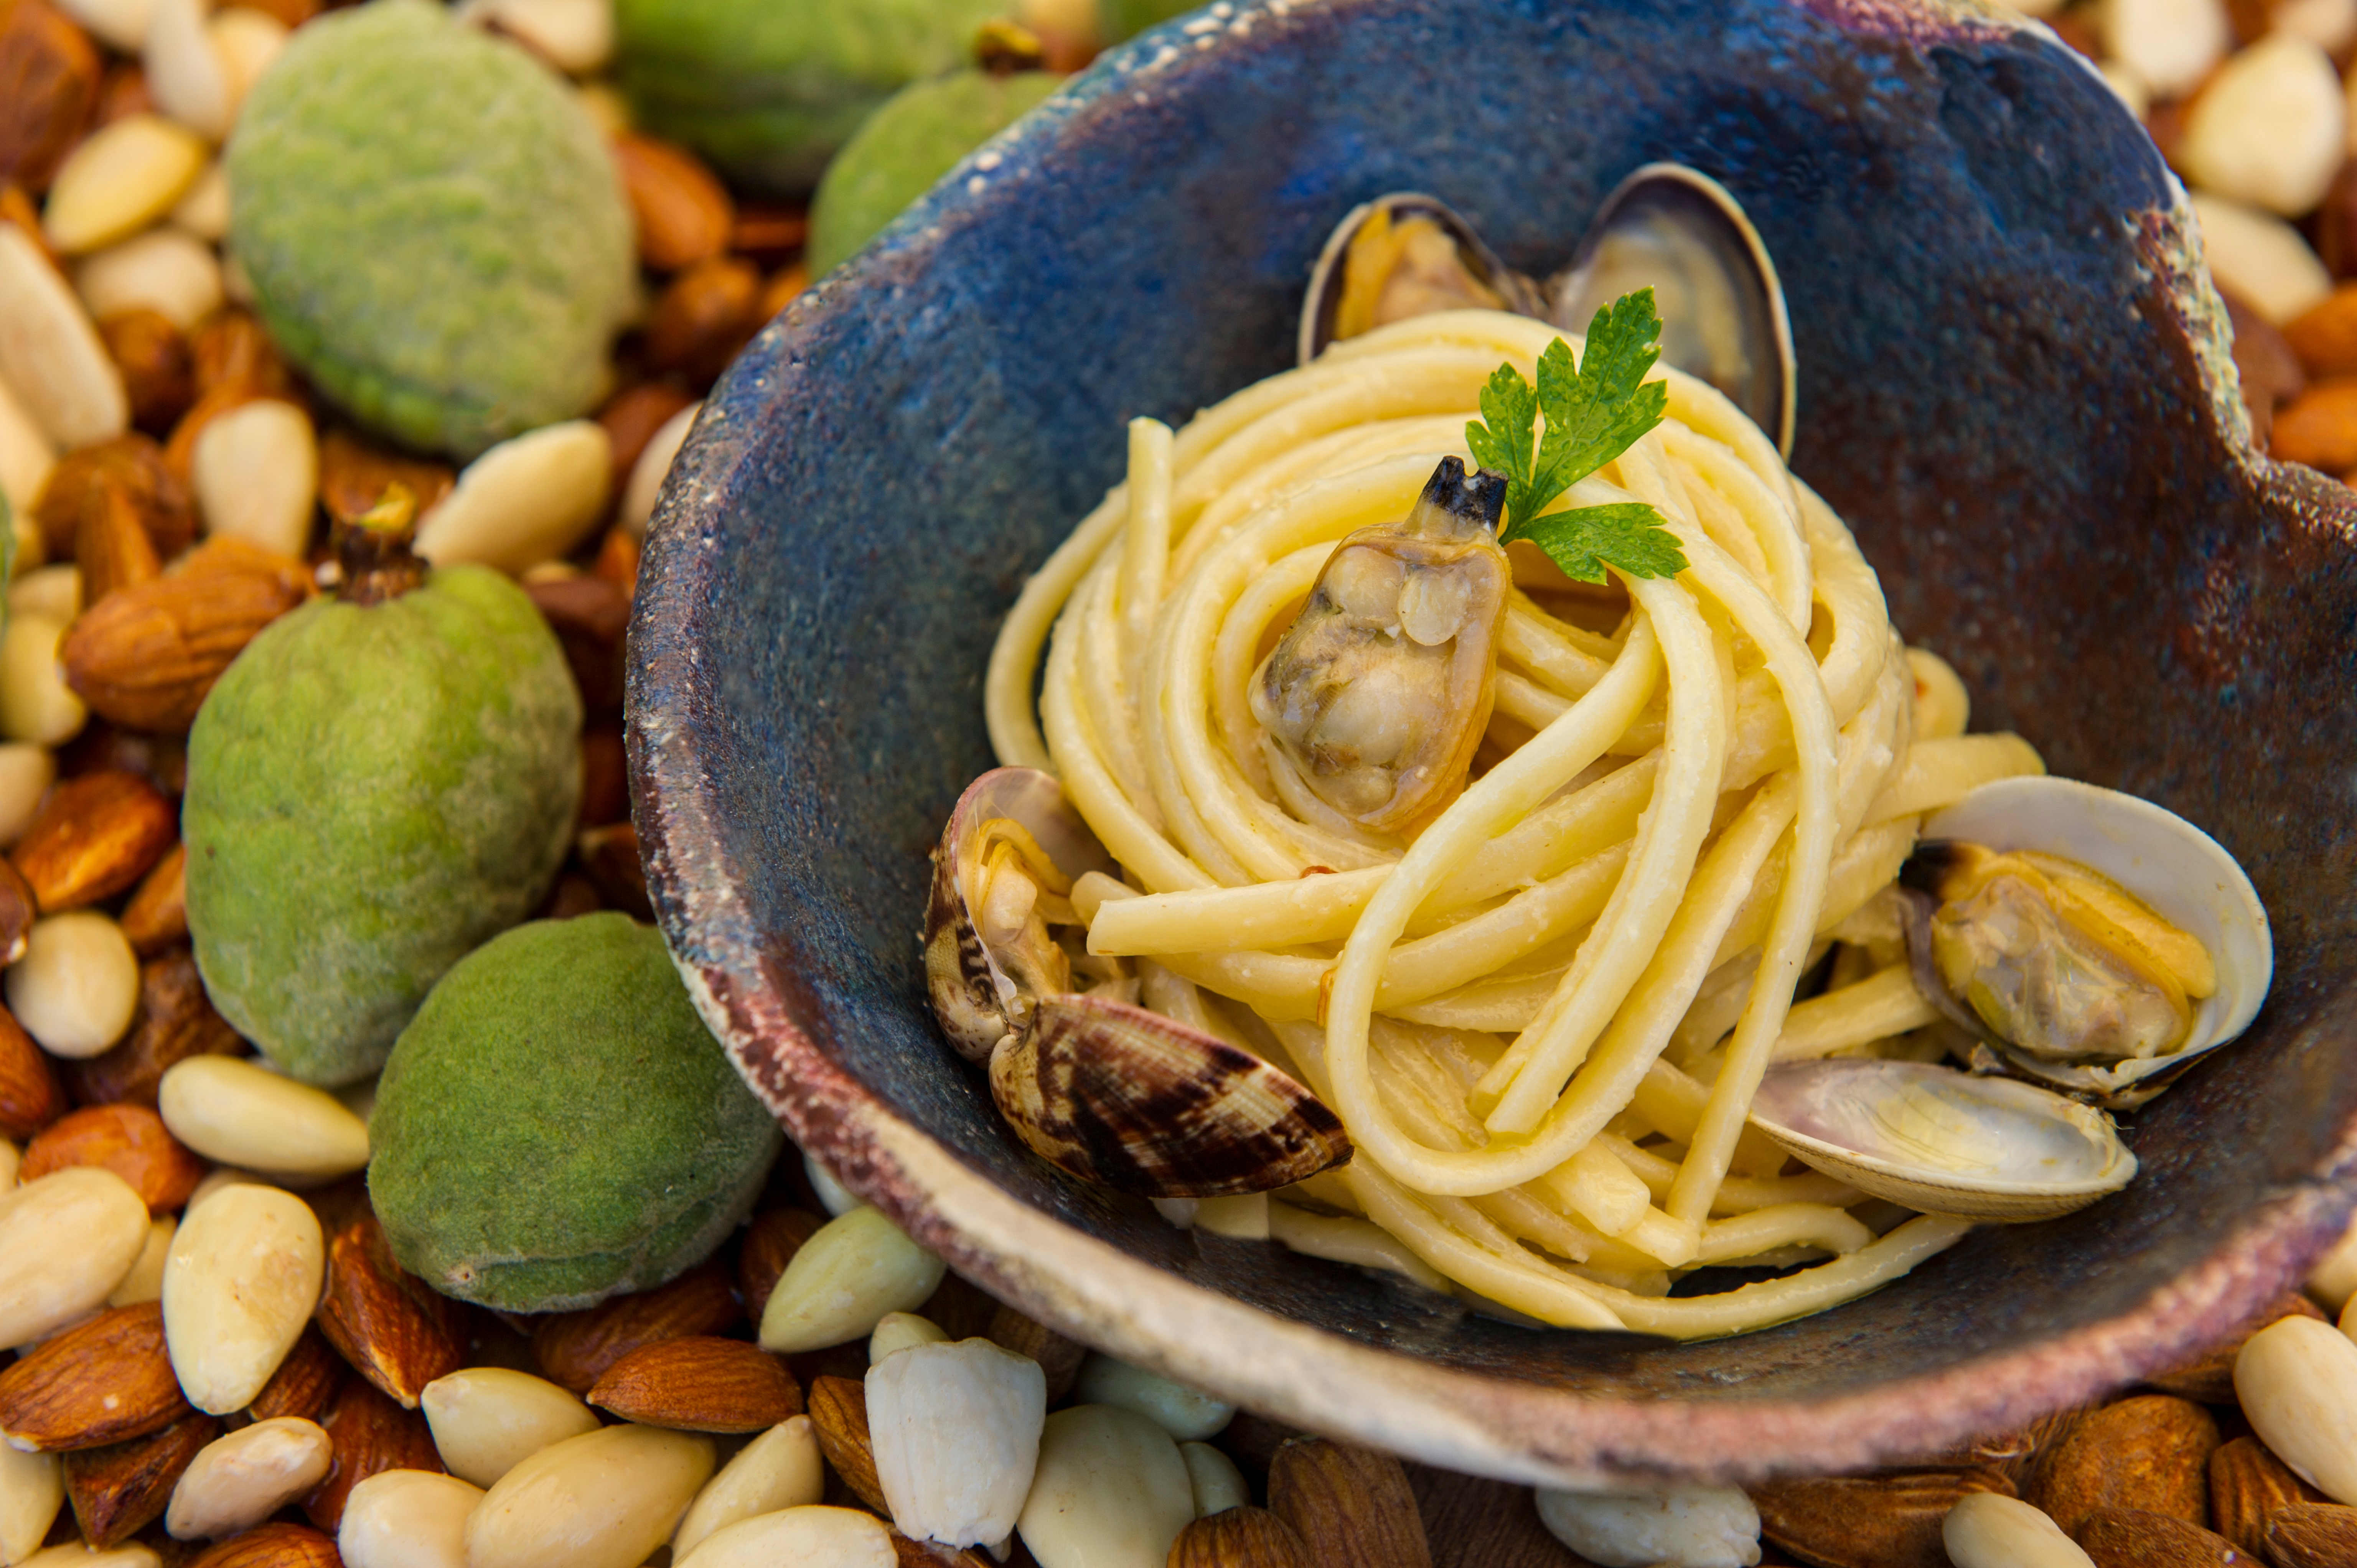 Linguine with Almond Milk and Clams